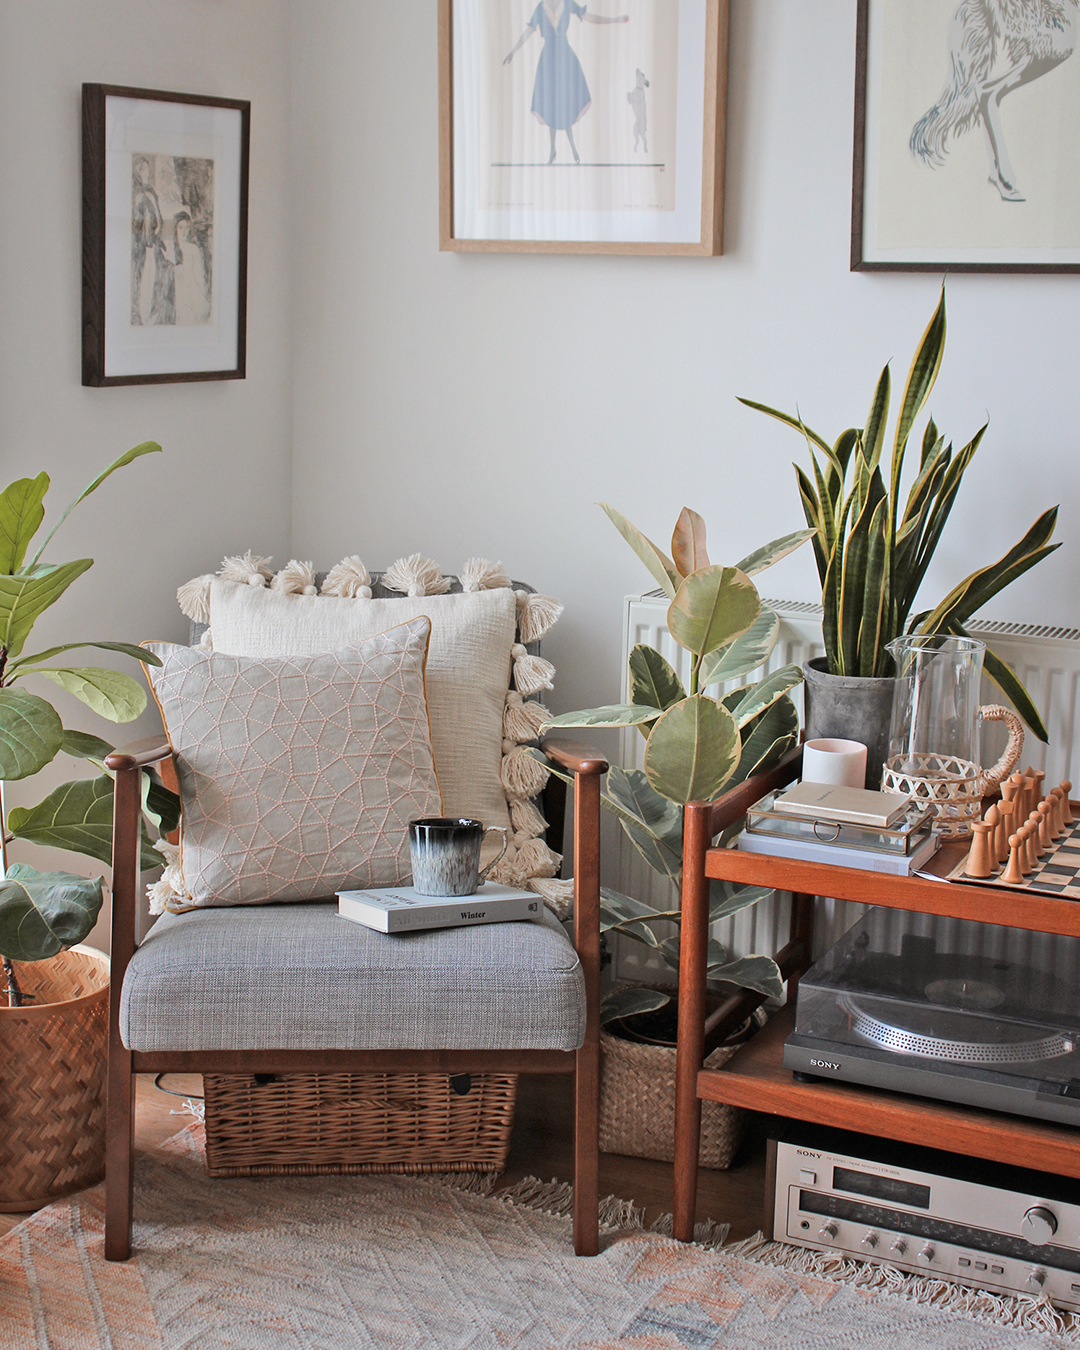 Nancy Straughan Living Room - curating your visual style